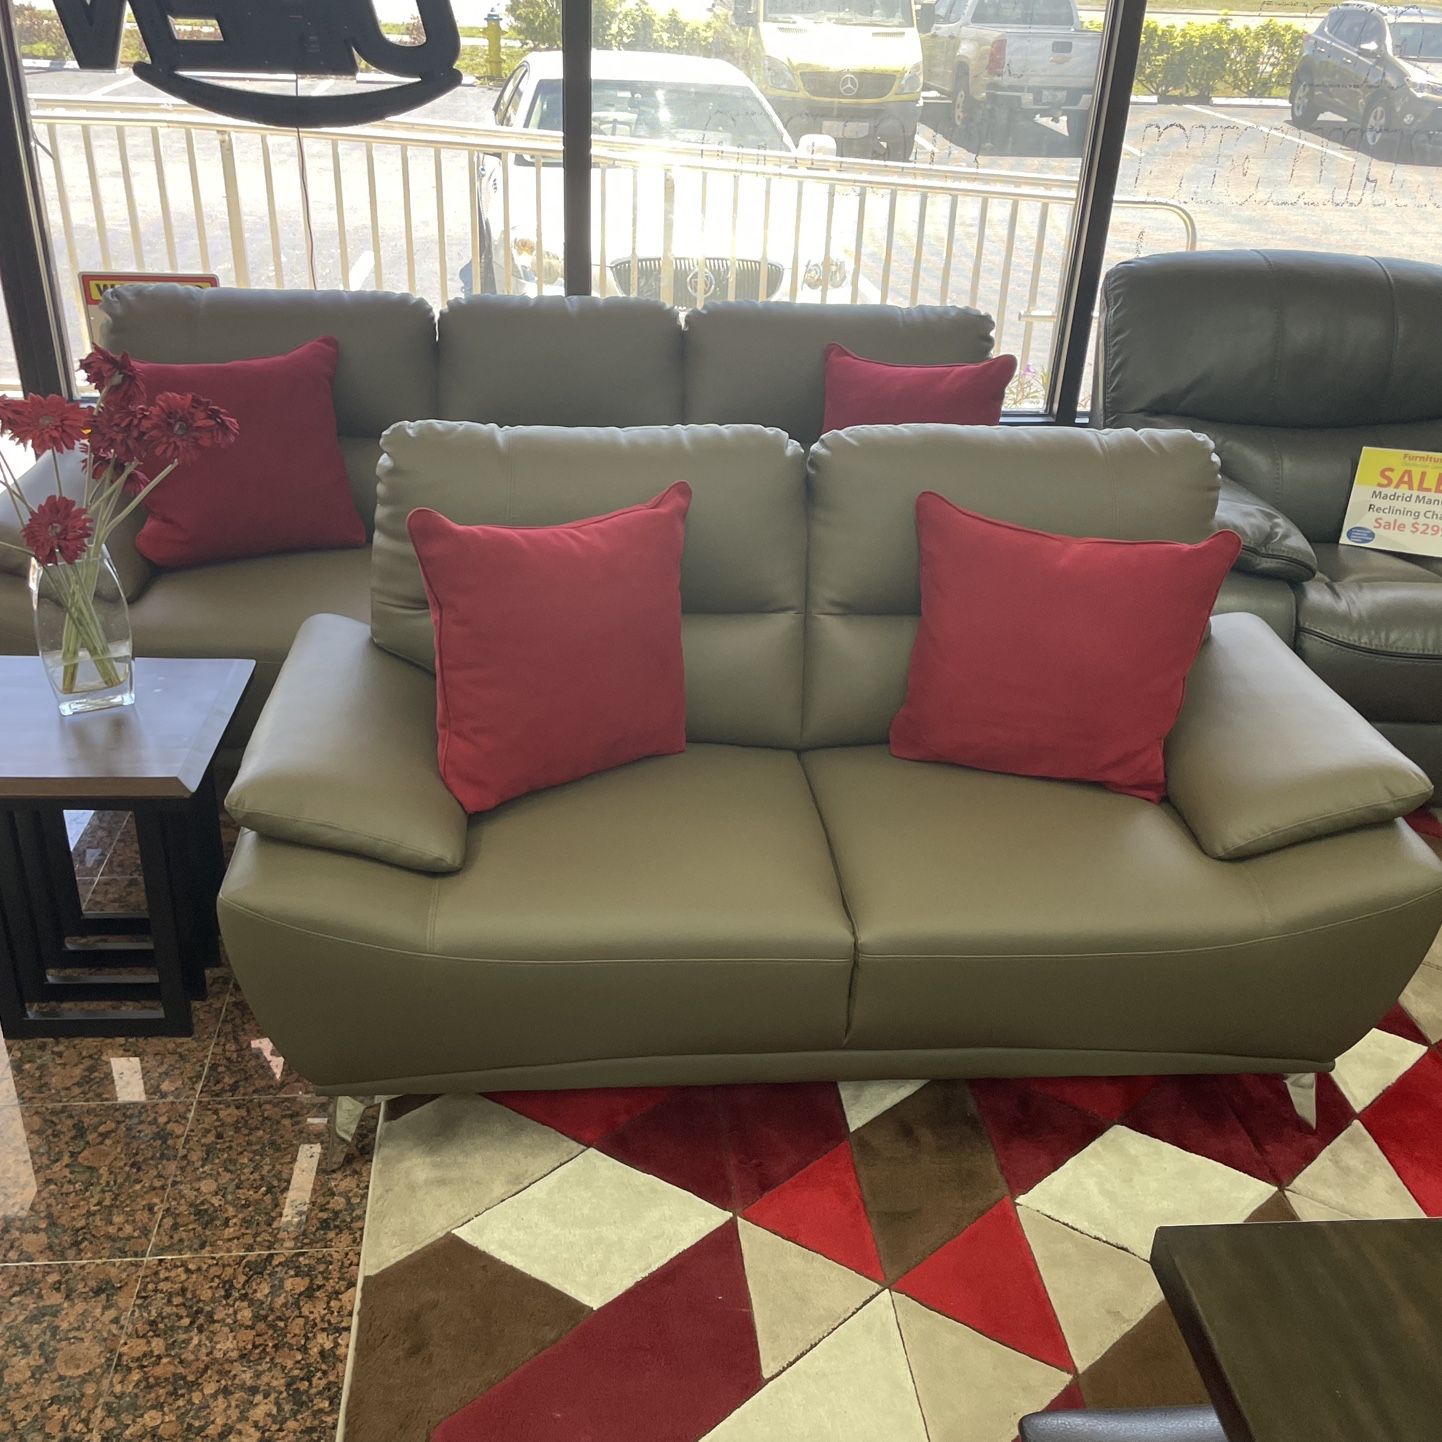 🦋🌸SPRING SALE! BRAND NEW SHOWROOM! FURNITURE FOR OVER 1/2 OFF! ALL STOCK ON DISPLAY! NEXT TO GNC! TYRONE SQUARE MALL! ORDER BY PHONE!🎆$1 DOWN EXTEN